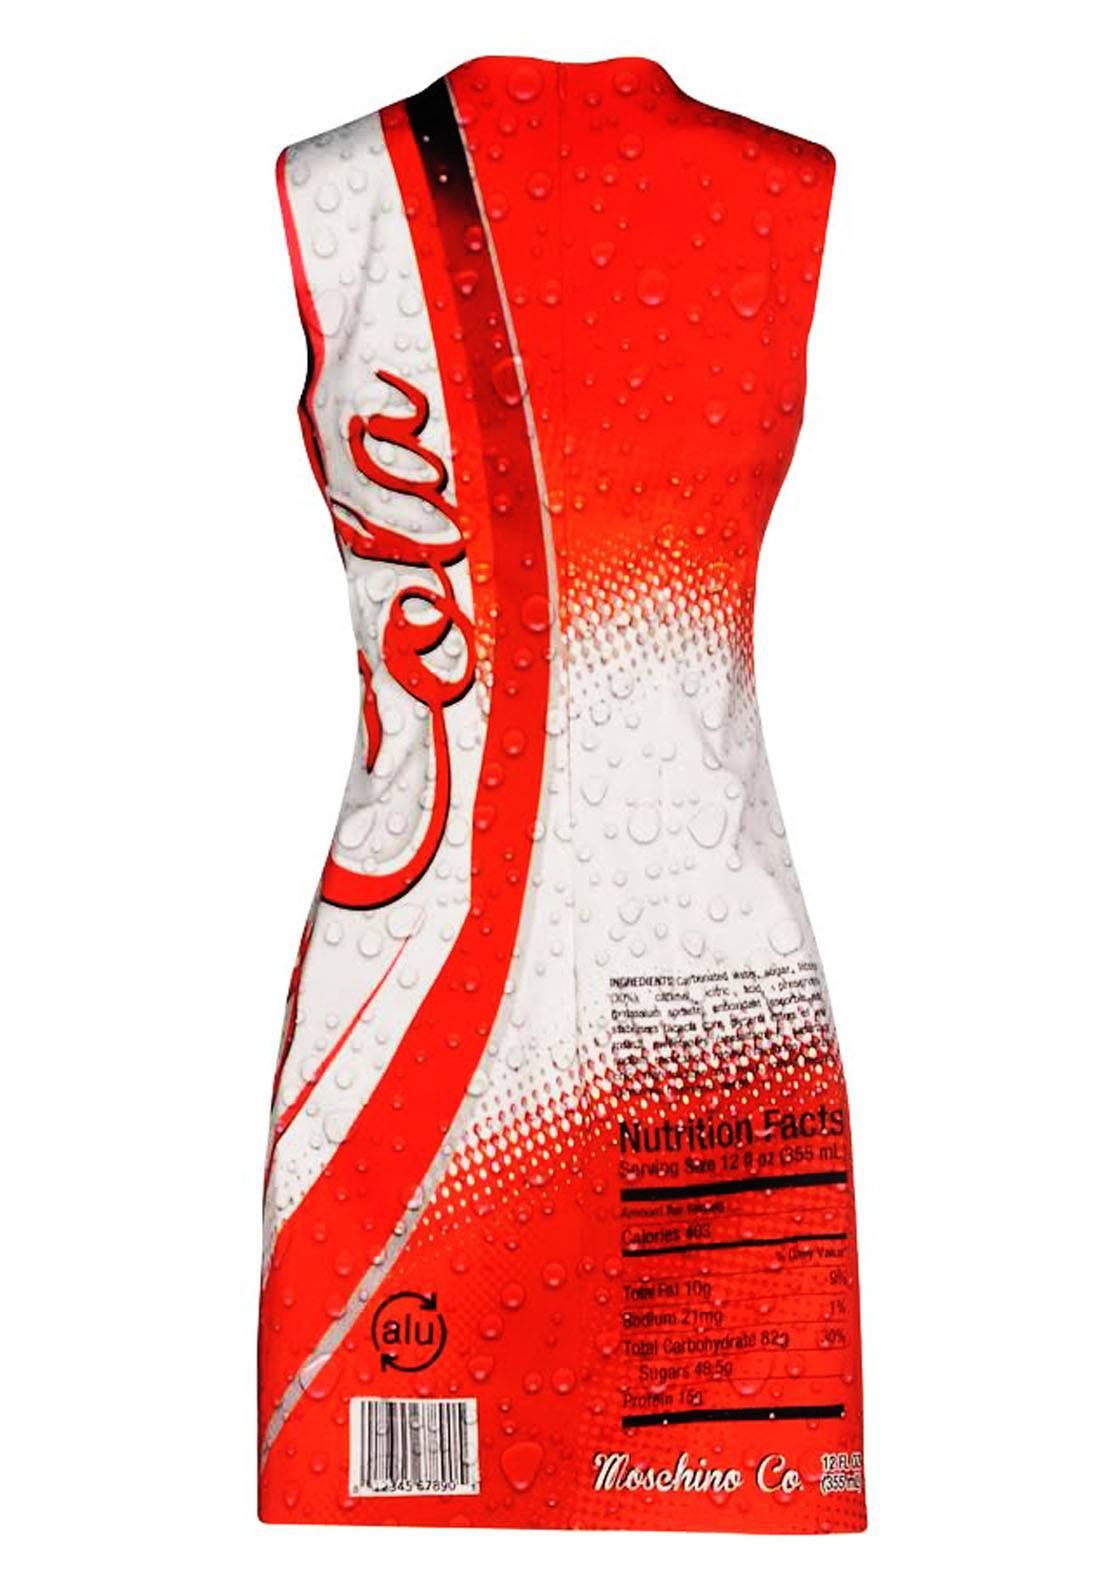 New MOSCHINO COUTURE By JEREMY SCOTT COCA COLA Dress
Italian Size 40 -  US 4
Colors - Red, White, Gray, Black
Stretch Fabric - 97% Rayon, 3% Other Fiber
Back Side Zip Closure
Measurements: Length - 34 inches, Bust - 16, Waist - 13.25, Hip -